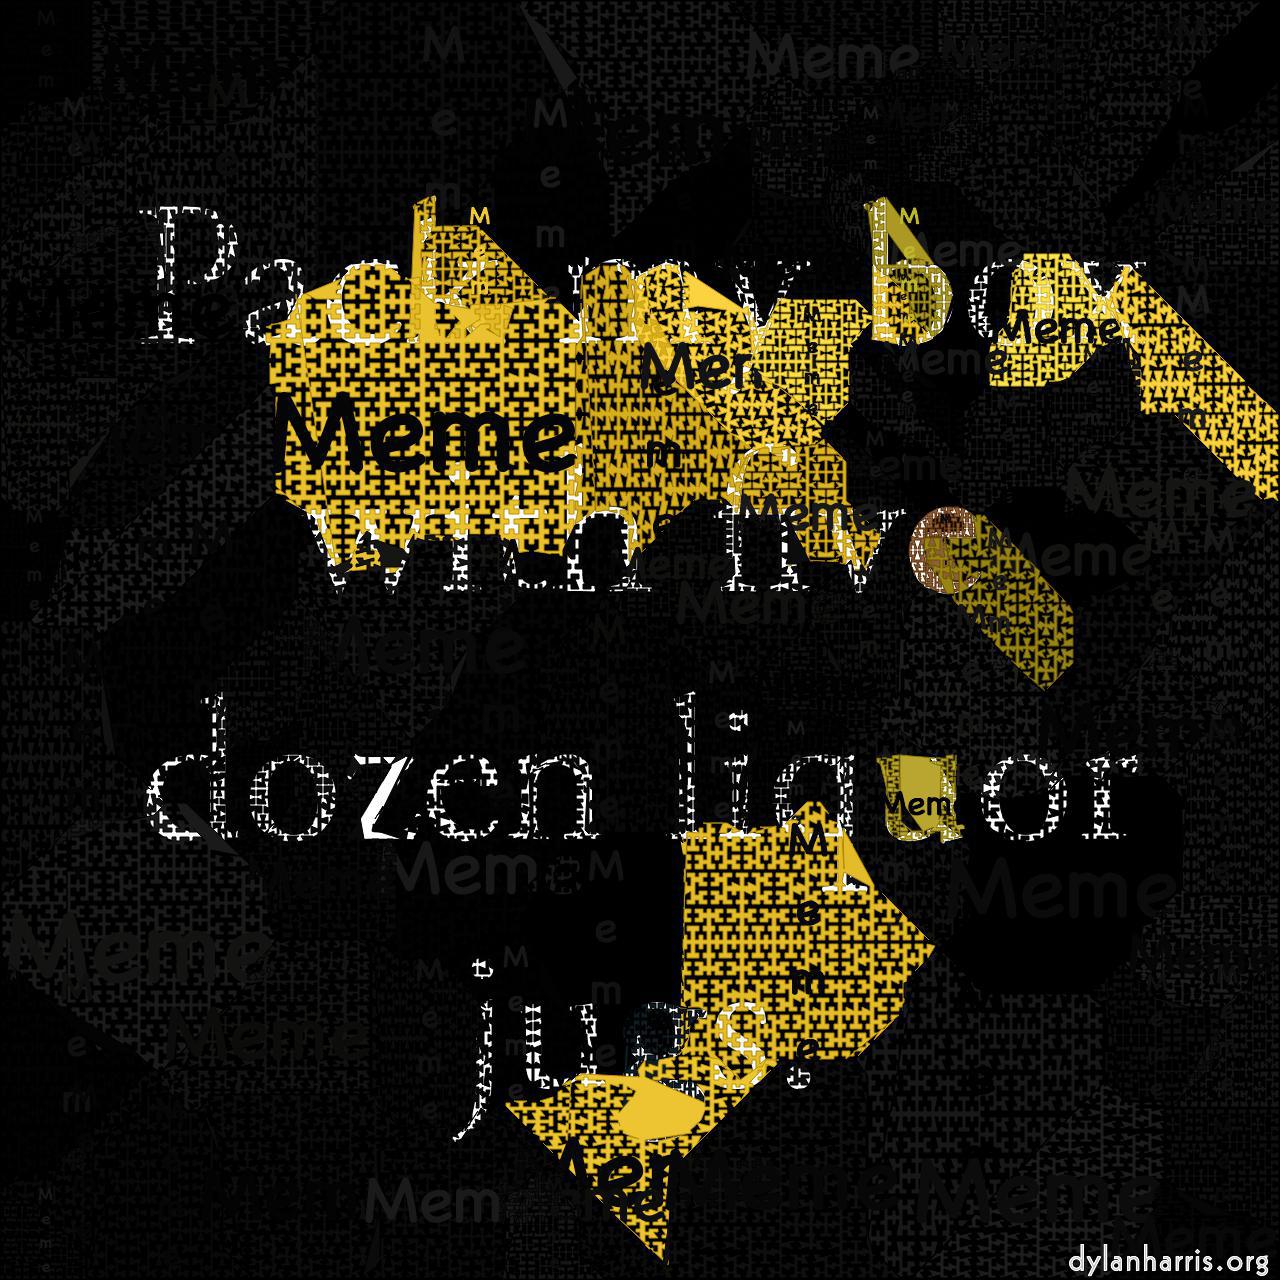 image: mosaic for source with white backgrounds :: large cell with pattern and text